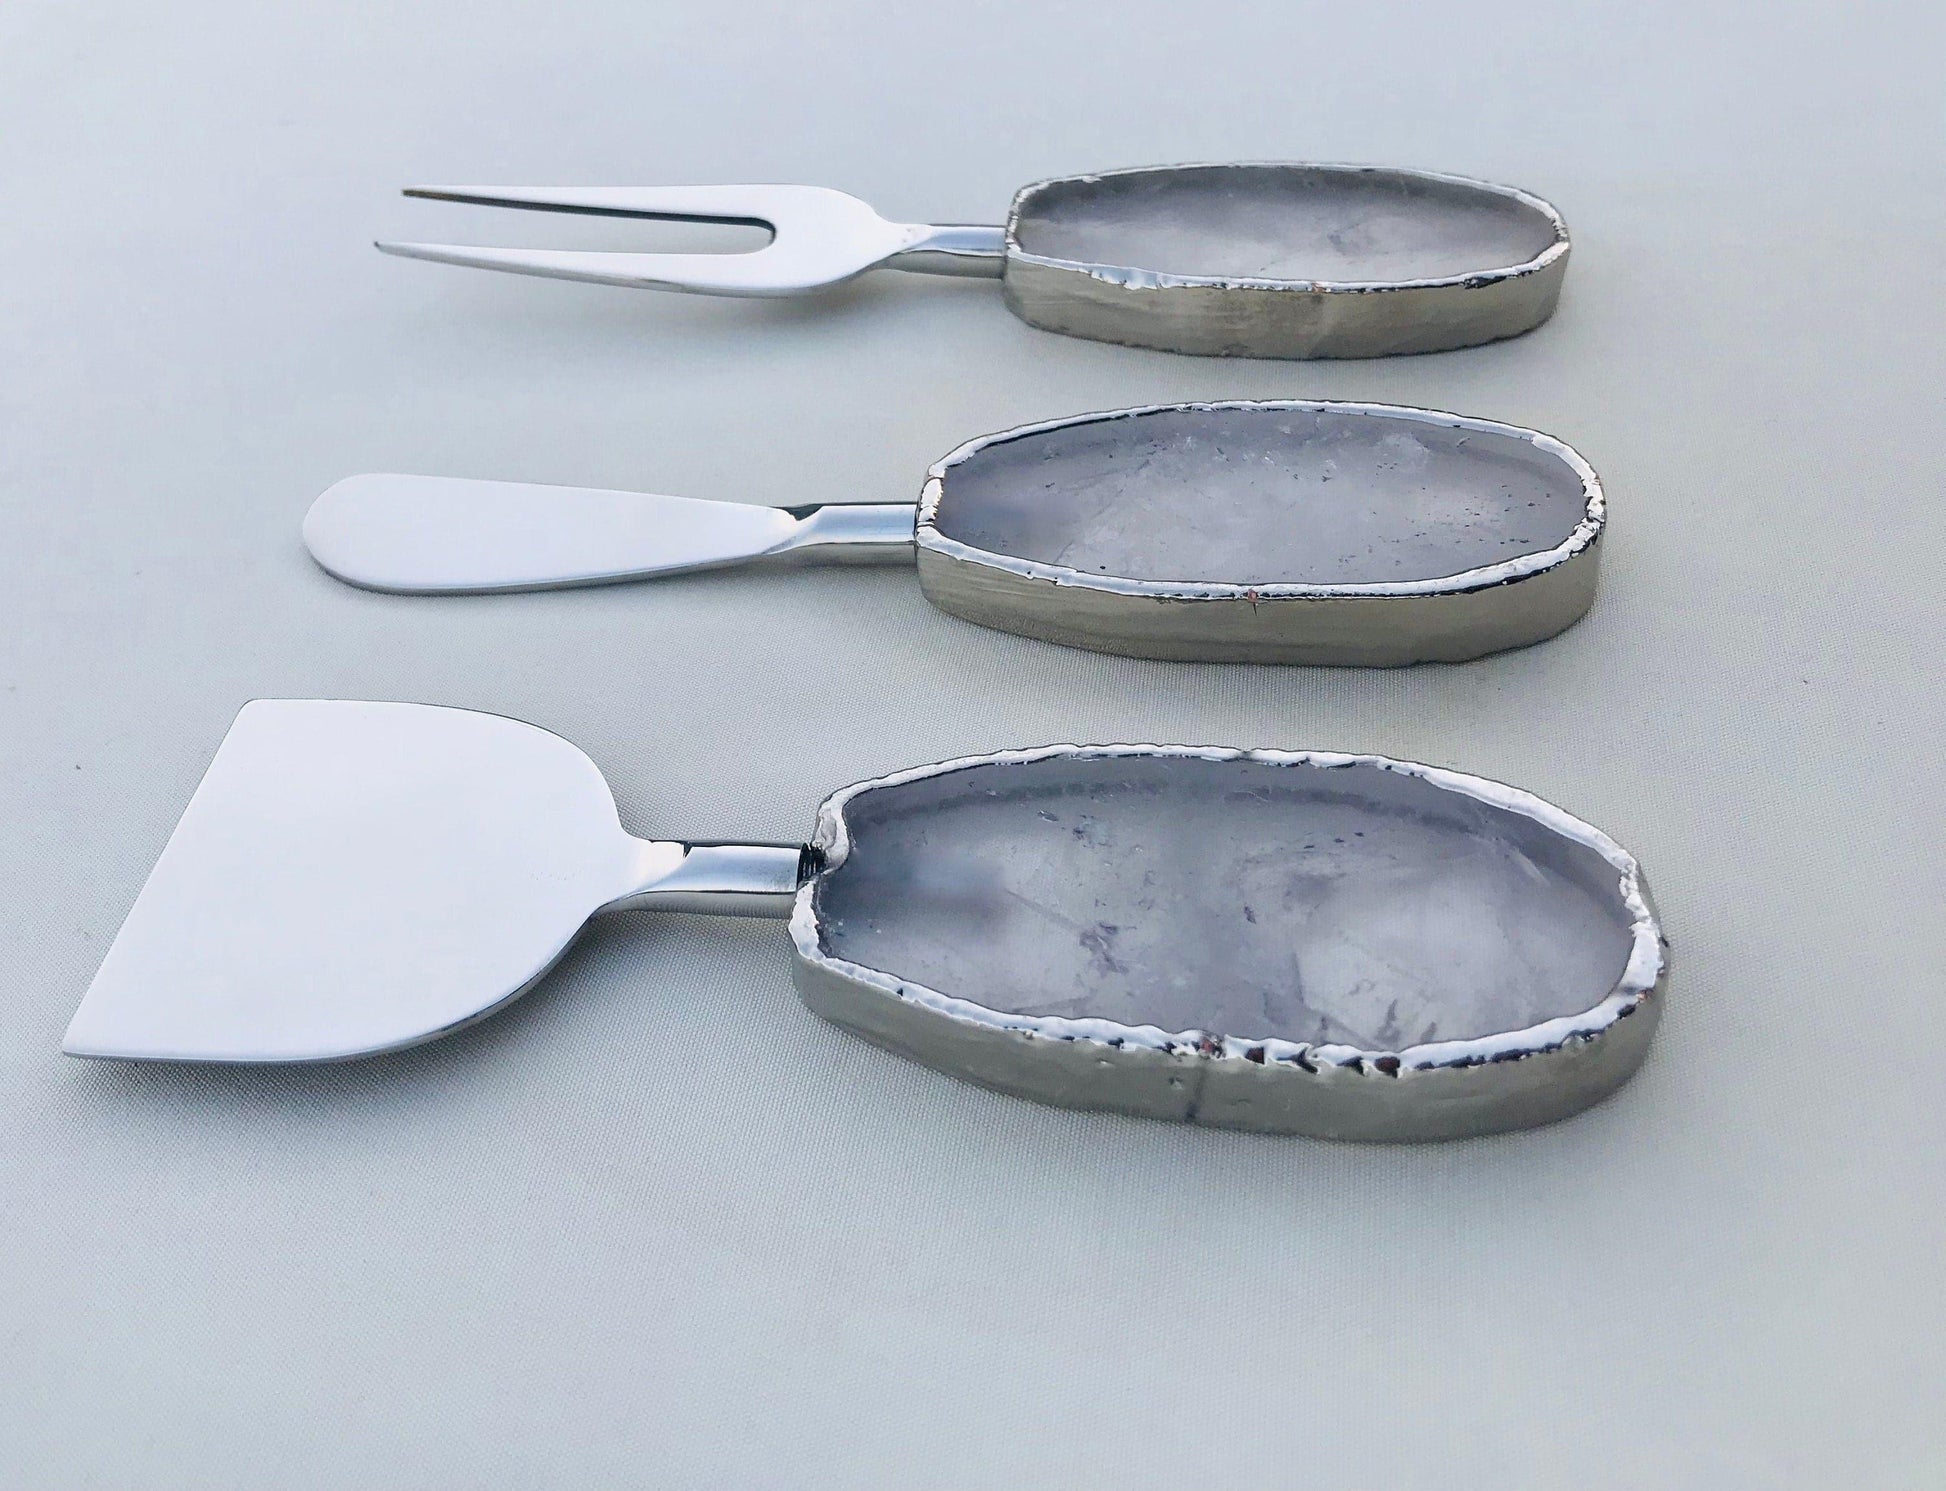 Set of 3 Agate Clear Quartz Cheese Knives Spreaders - MAIA HOMES